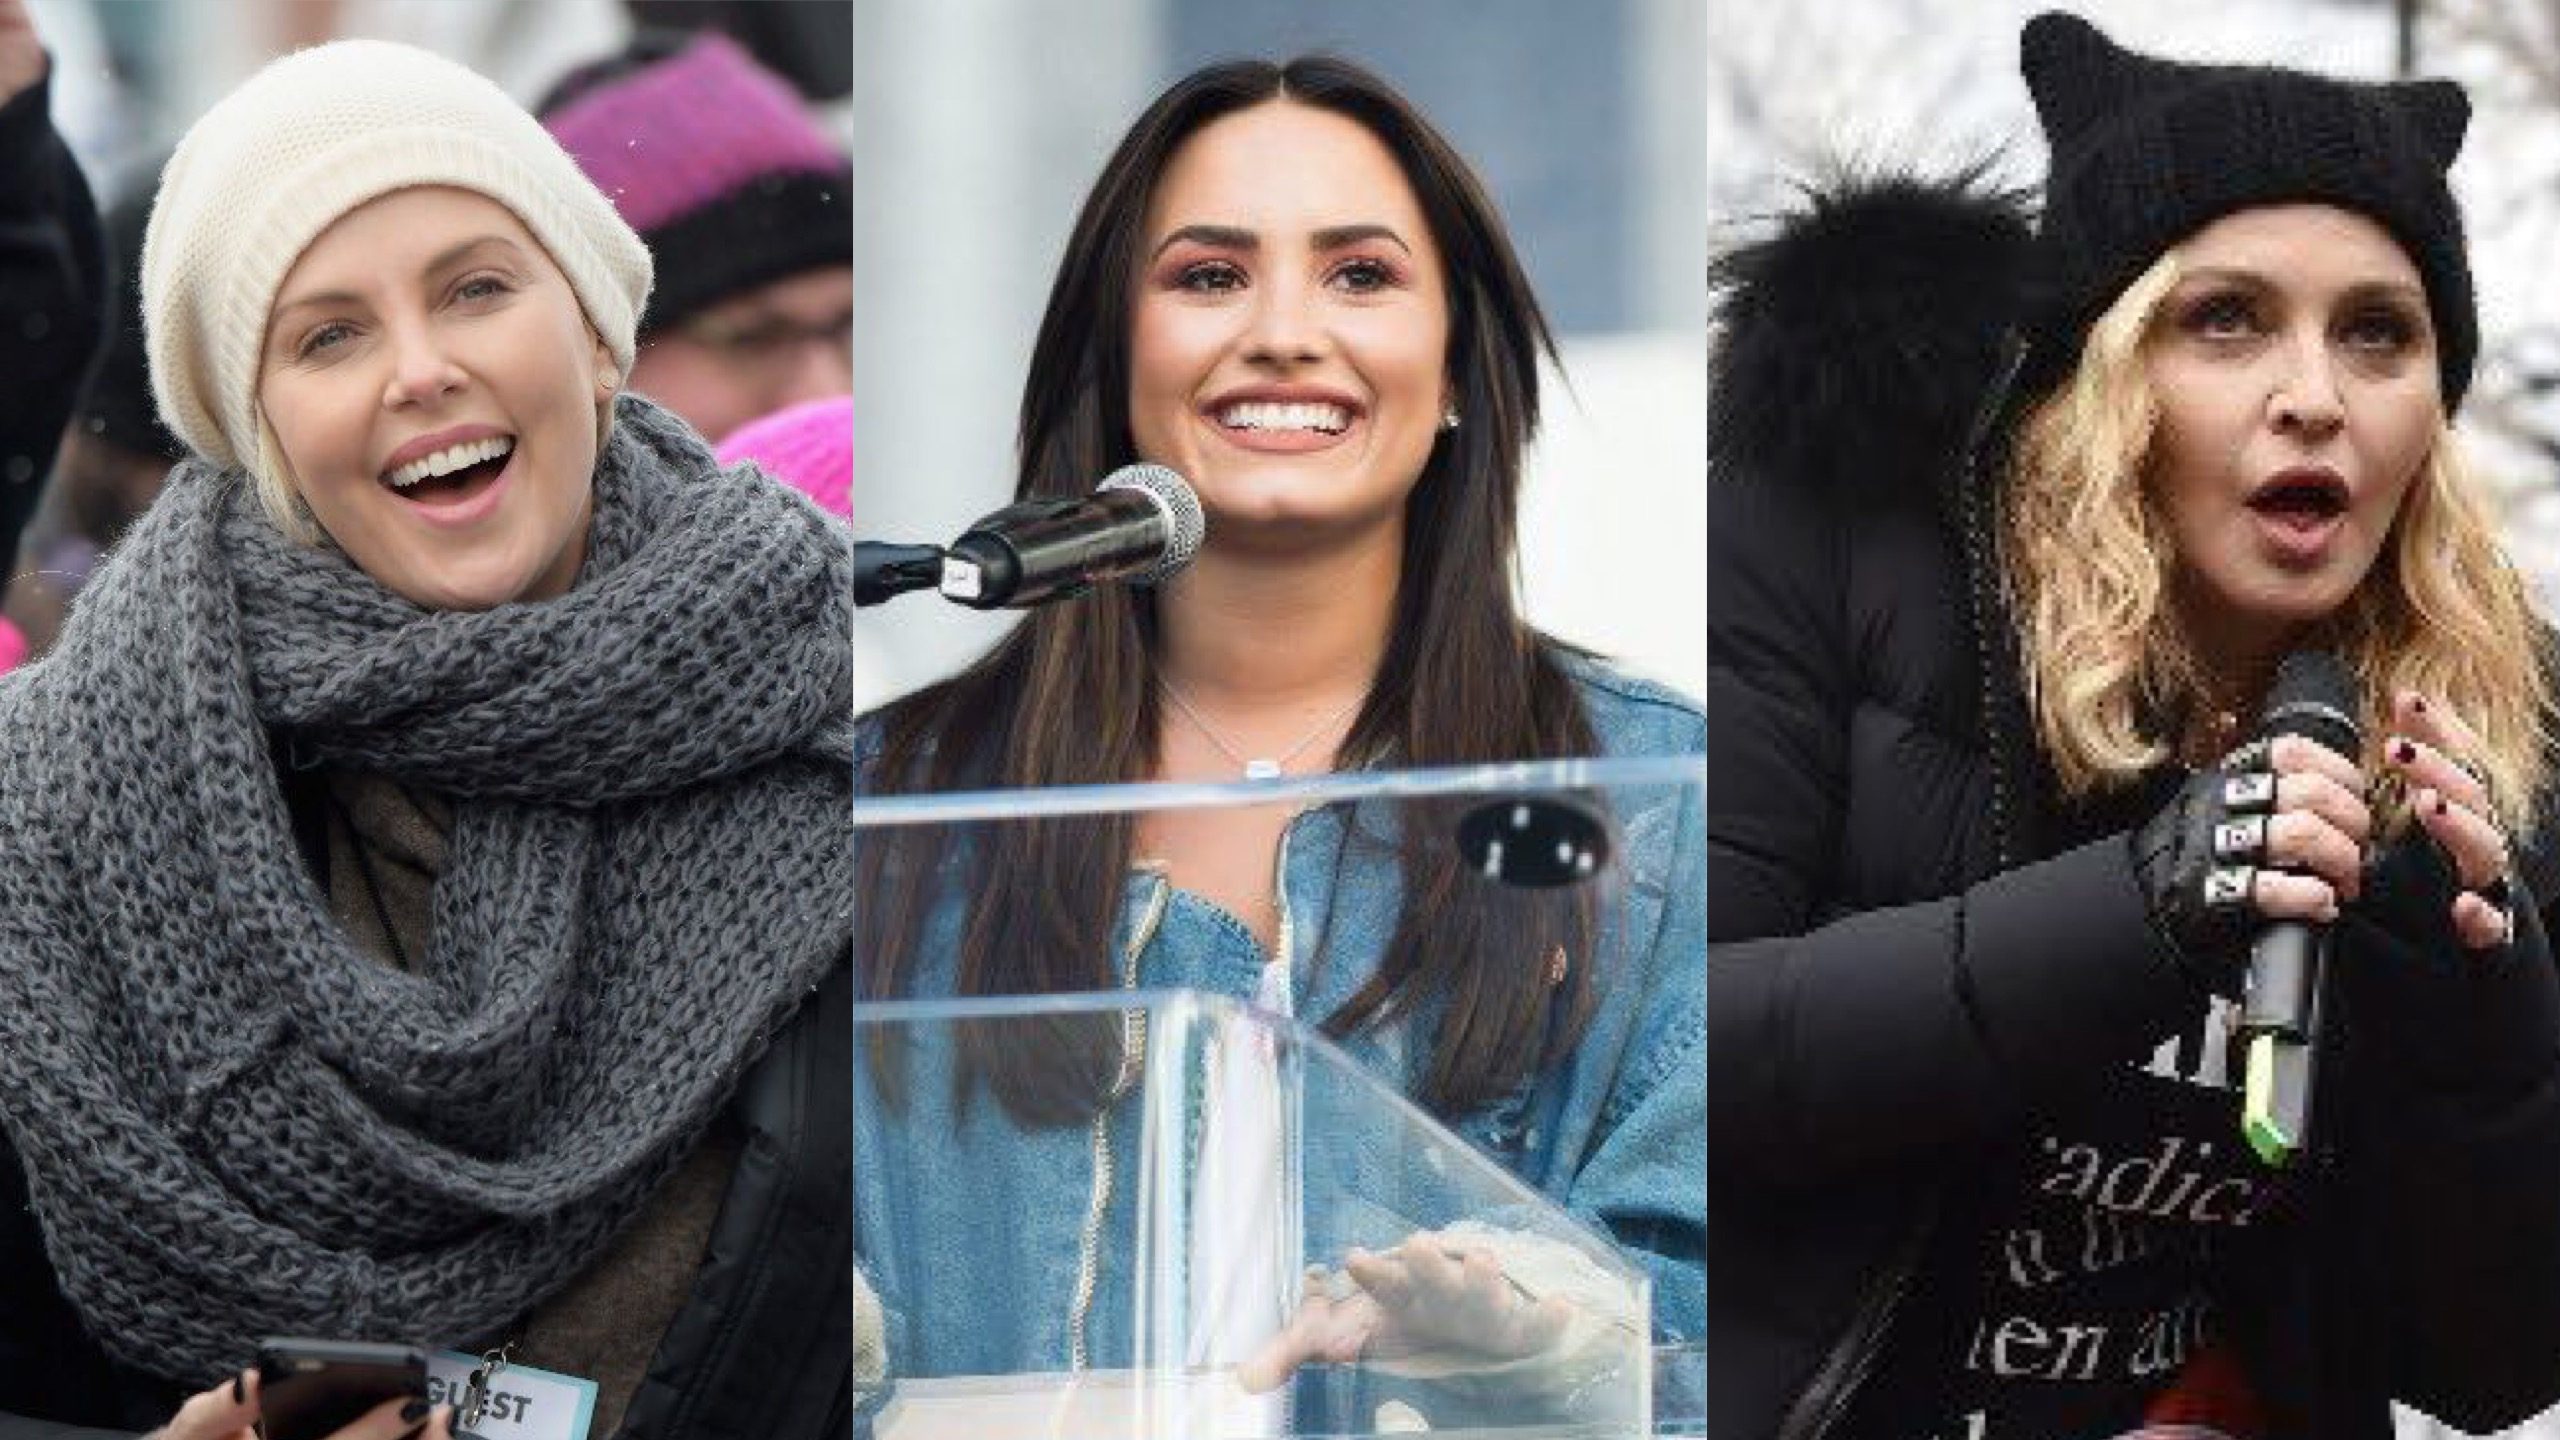 IN PHOTOS: Stars at the Women’s March in Washington